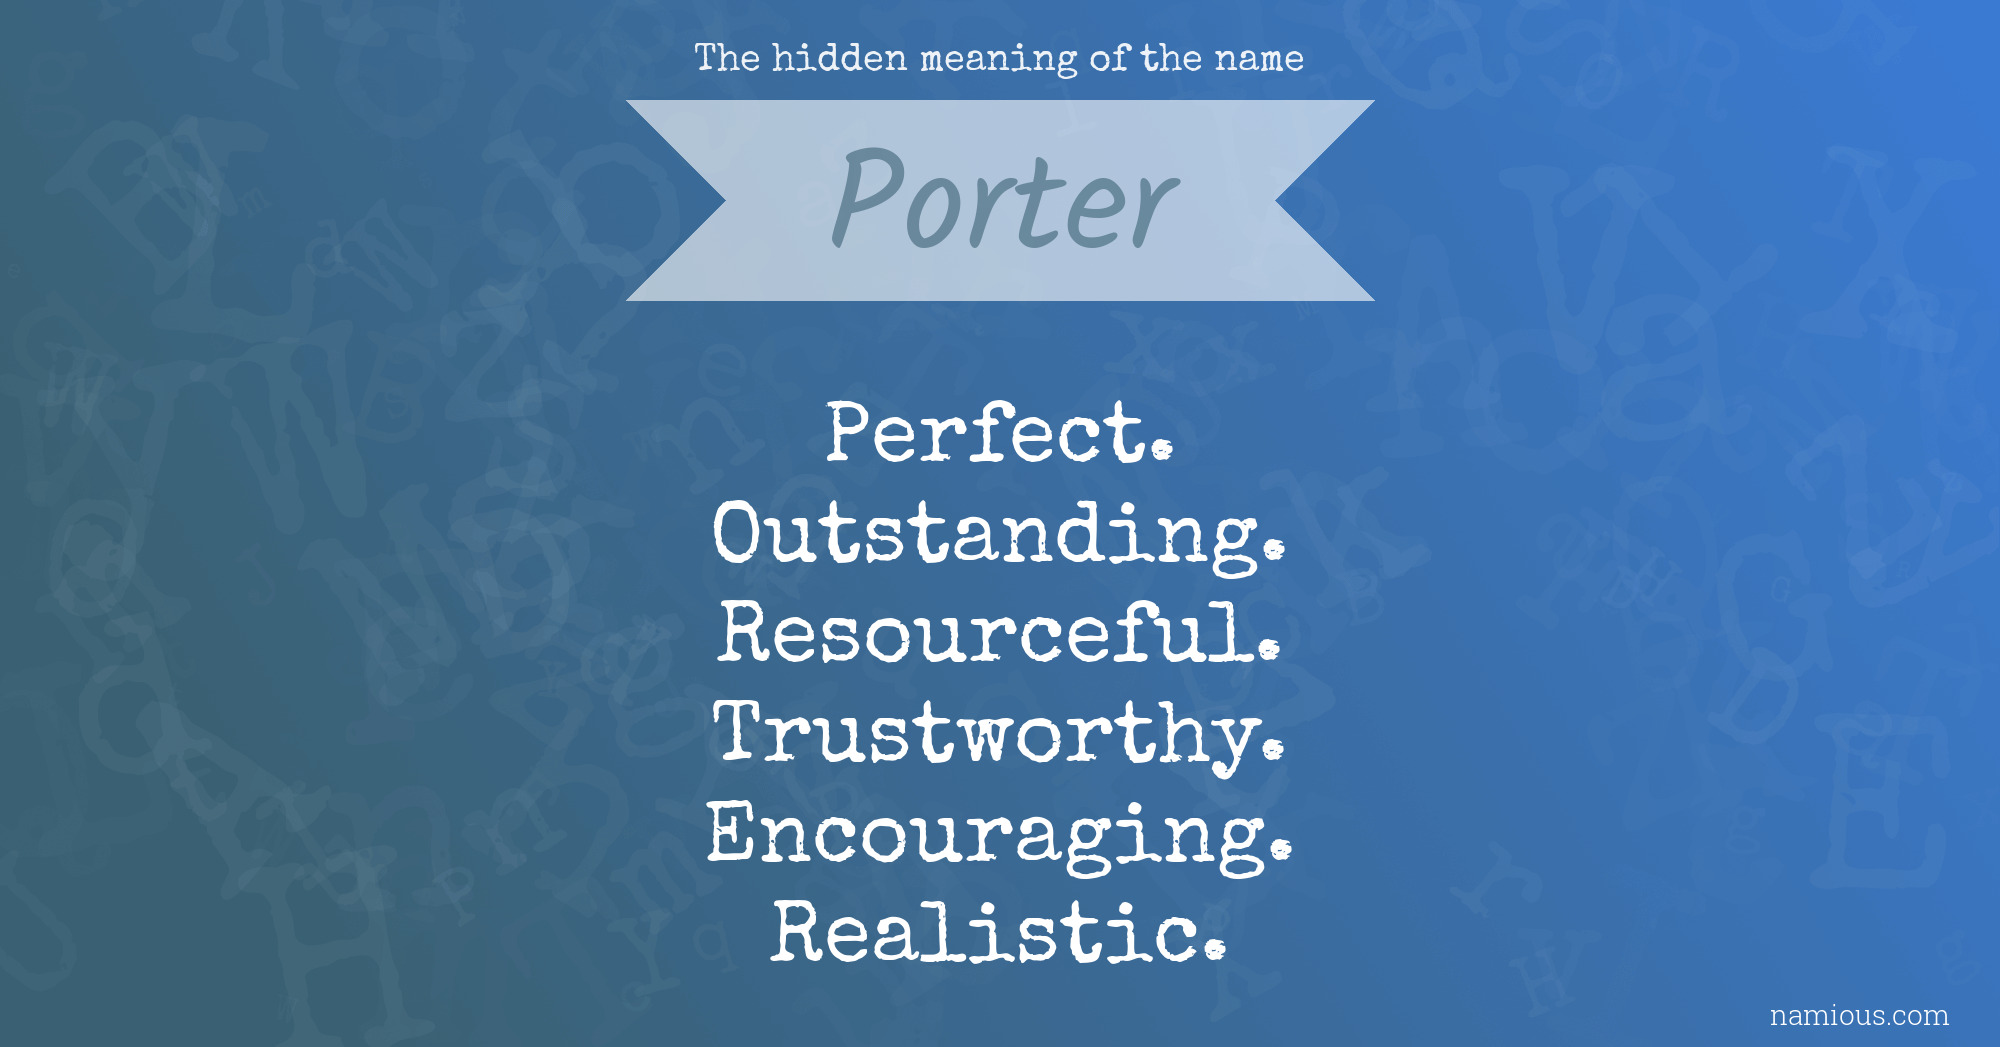 The hidden meaning of the name Porter